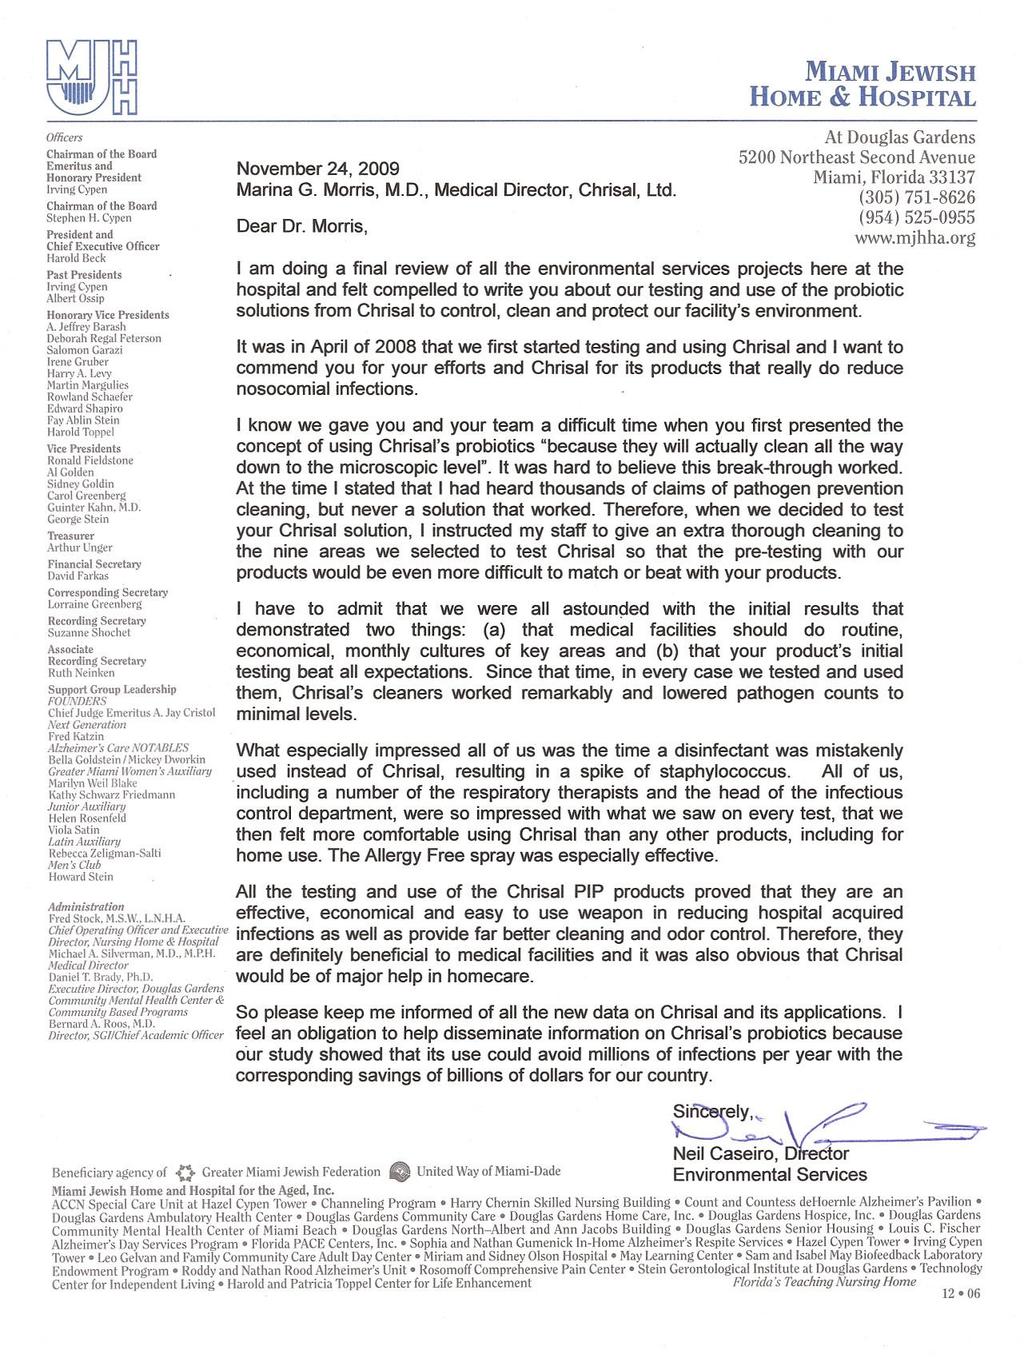 Following is the reference letter from Miami Jewish Home and Hospital dated November 24,